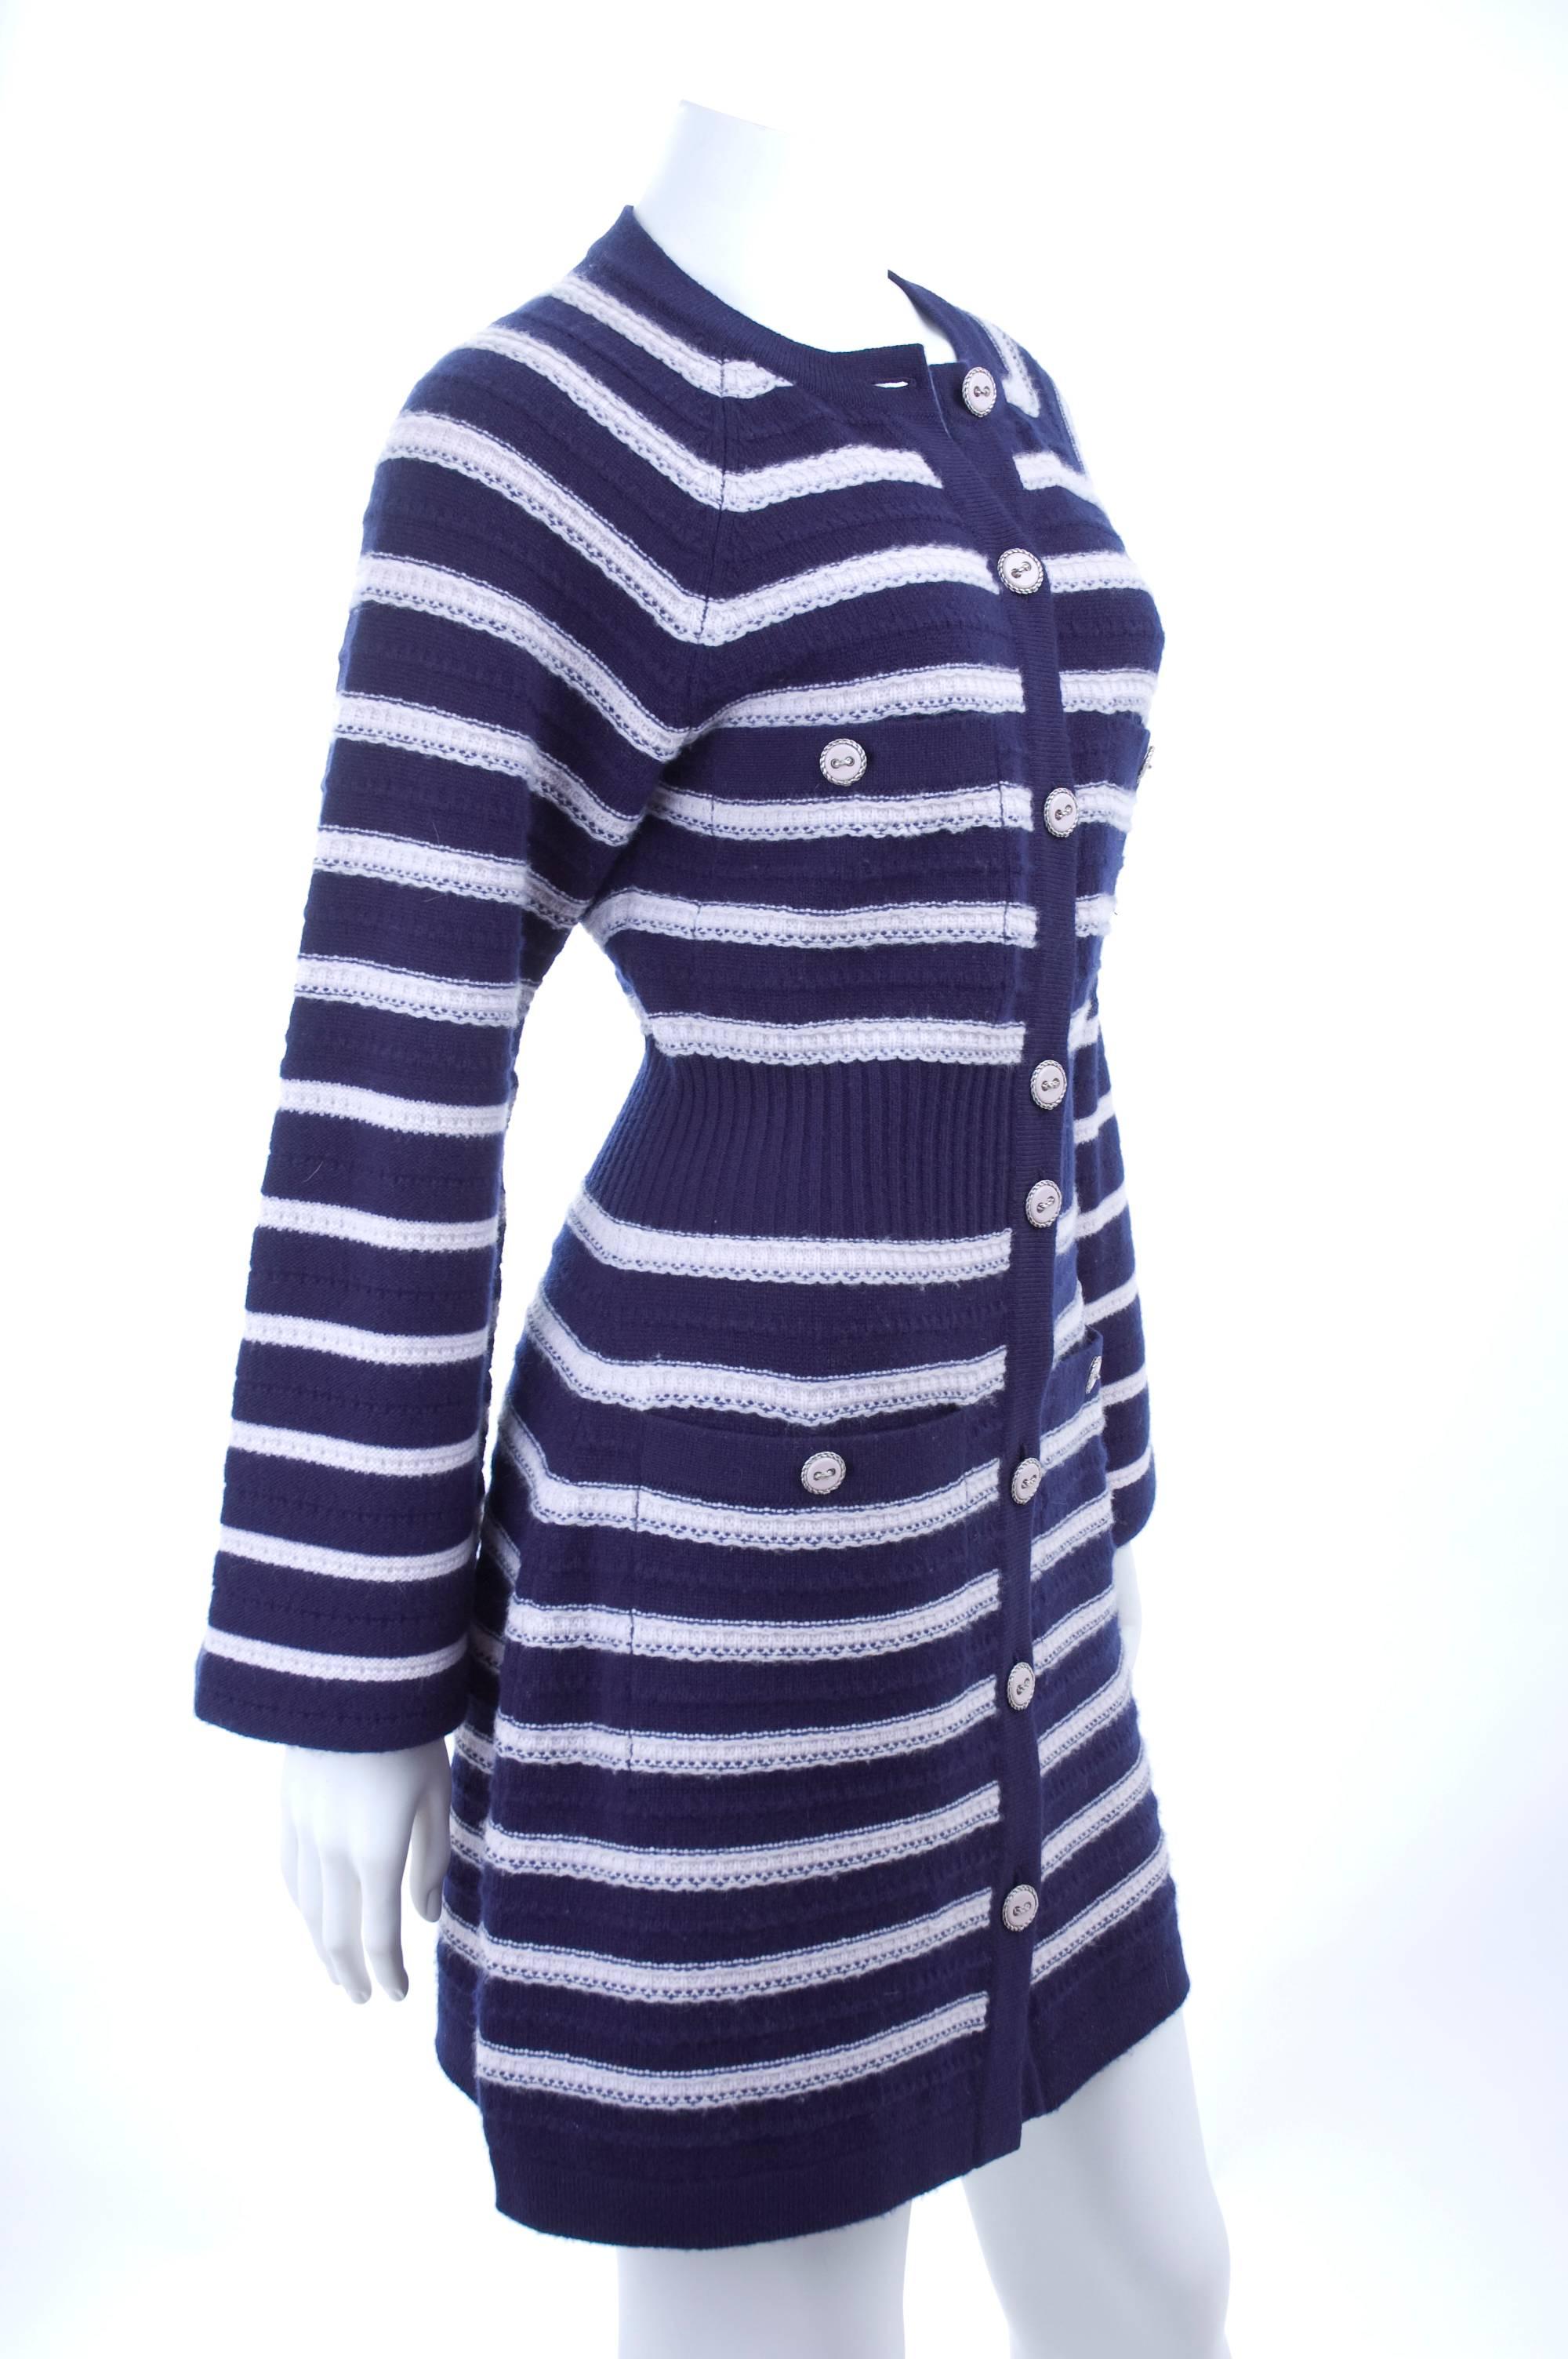 CHANEL cashmere knit jacket in navy with soft pink stripes. 
The buttons have a silver braided outline with a pink center.
The sleeves have the seamline on the outside to elbow high, they probably meant to be rolled up. Show in the pictures both